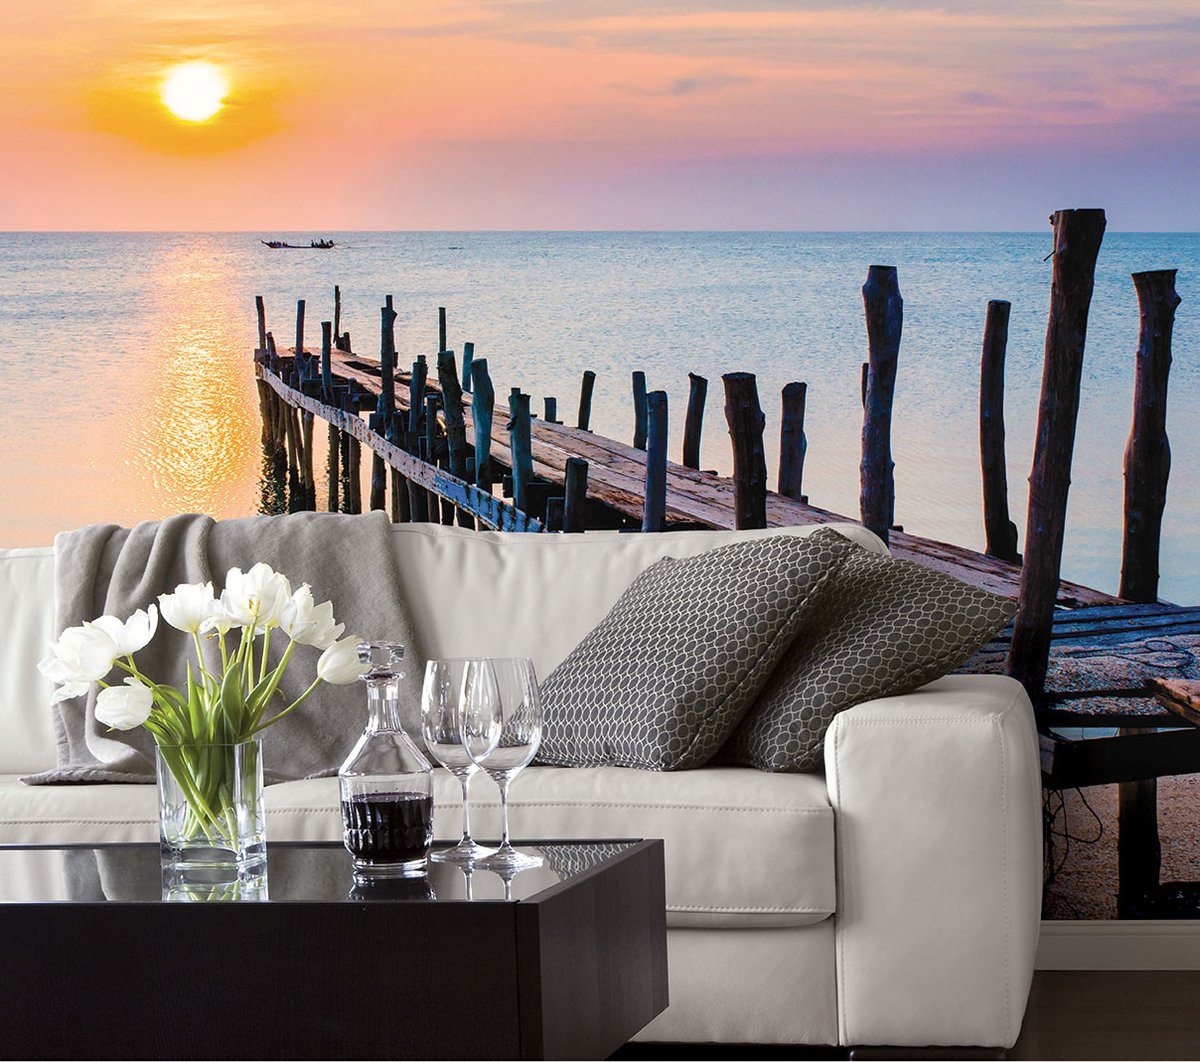 Relax at sunset anytime of the day with this Pier at Sunset Global Fusion Mural G45272. 
: 
#wallpaperpeeps #thewallpaperpeople #decor #wallpaperlove #featurewall #wallcovering #Wallpaper #GalerieWallpaper #GlobalFusion 
: 
bit.ly/2TYNTnV